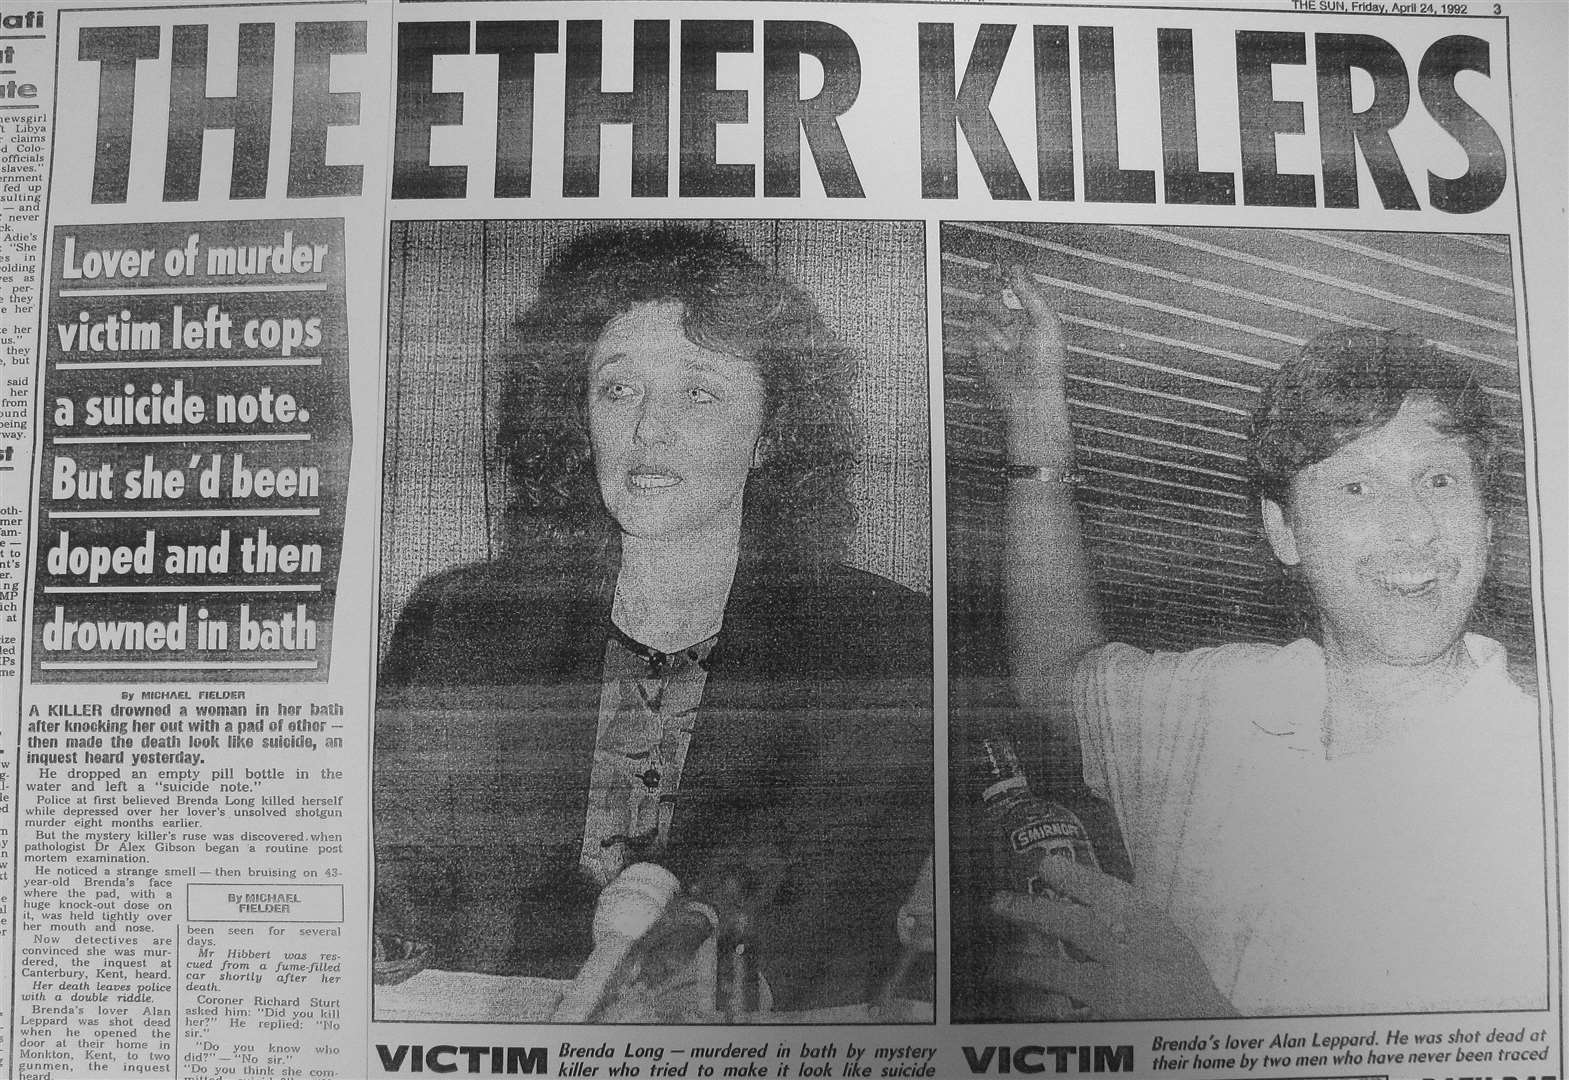 Brenda Long’s murderers were dubbed “The Ether Killers” by The Sun